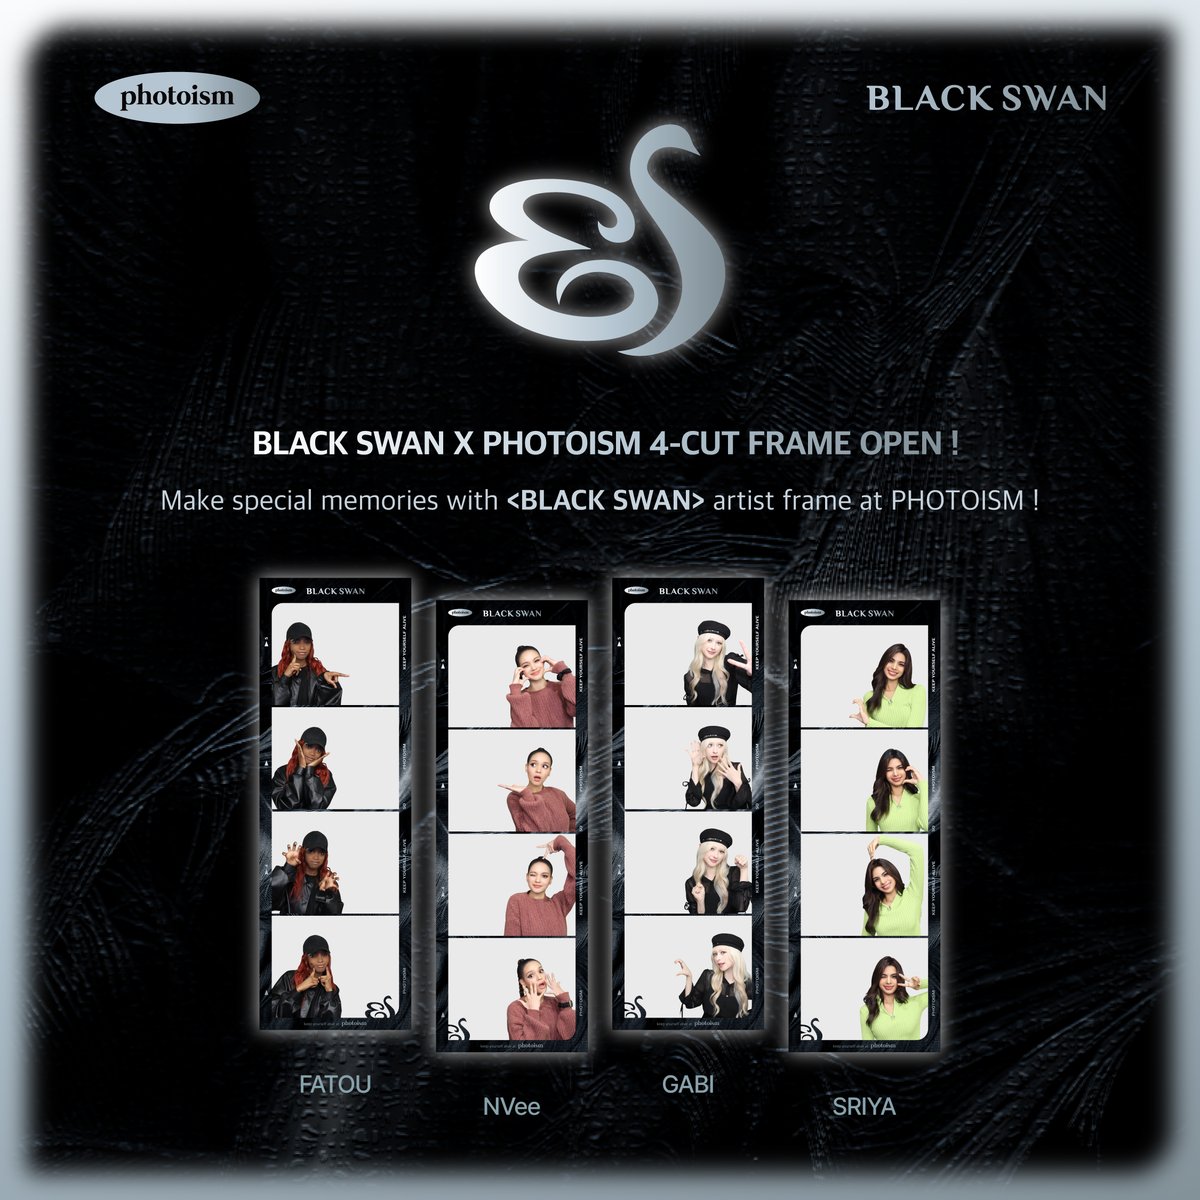 PHOTOISM X BLACKSWAN ARTIST FRAME OPEN ! The <BLACKSWAN> artist frame has been released on photoism. Take photos and make special memories with <BLACKSWAN> photo frame at all of photoism stores. ▪ PERIOD | Apr 10 – Apr 23 (KST) Keep yourself alive at PHOTOISM